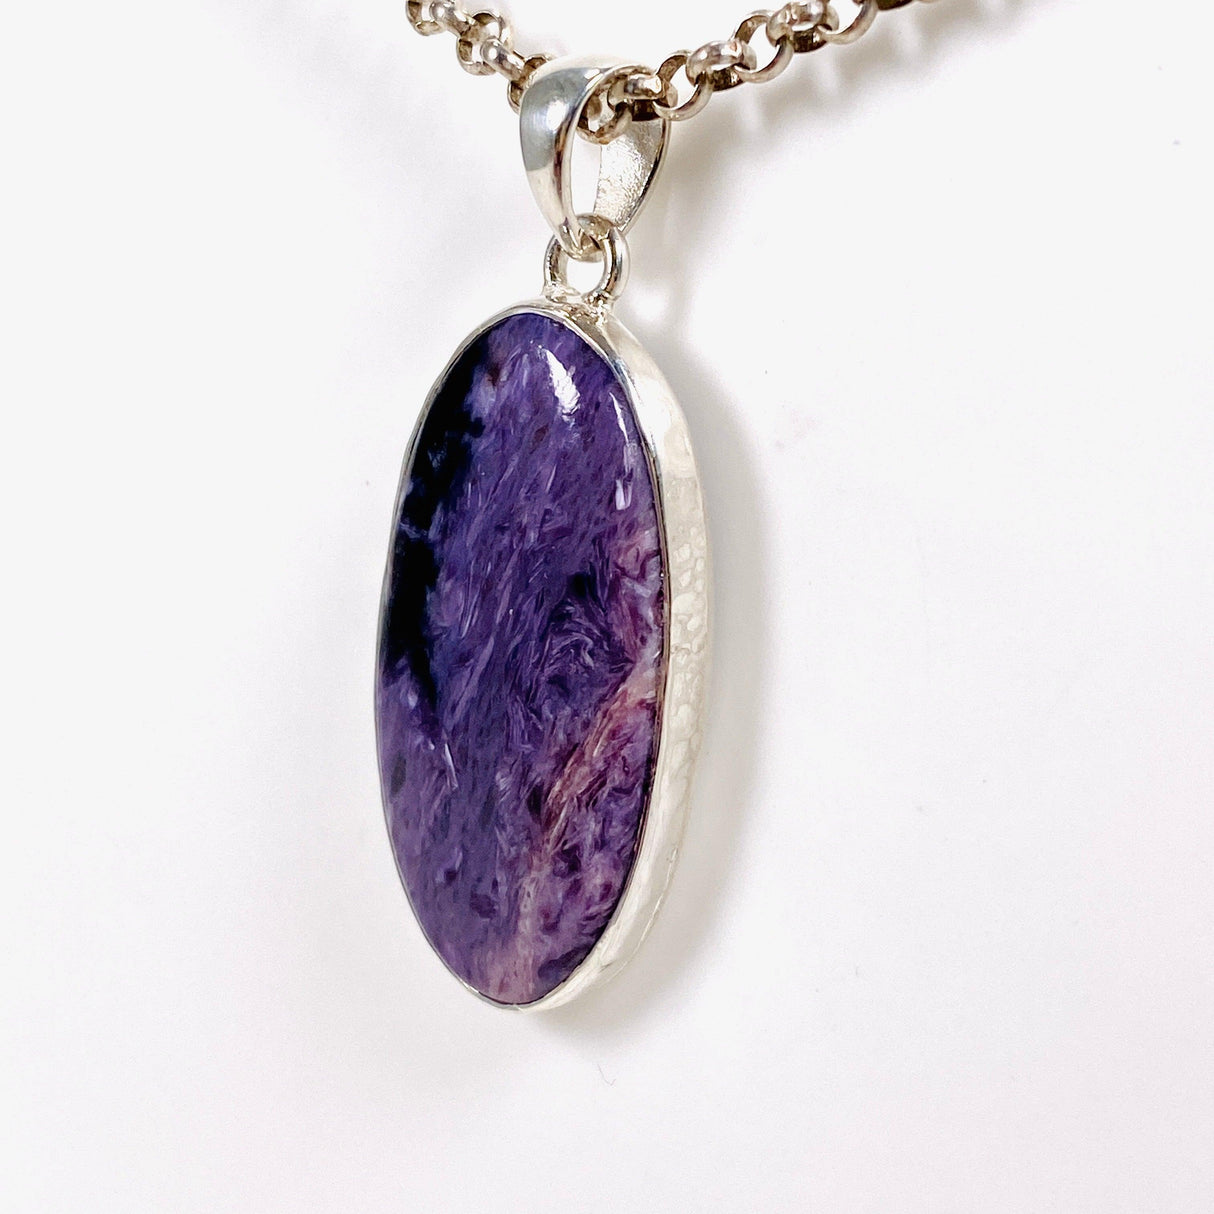 Purple Charoite oval pendant in sterling silver on a chain